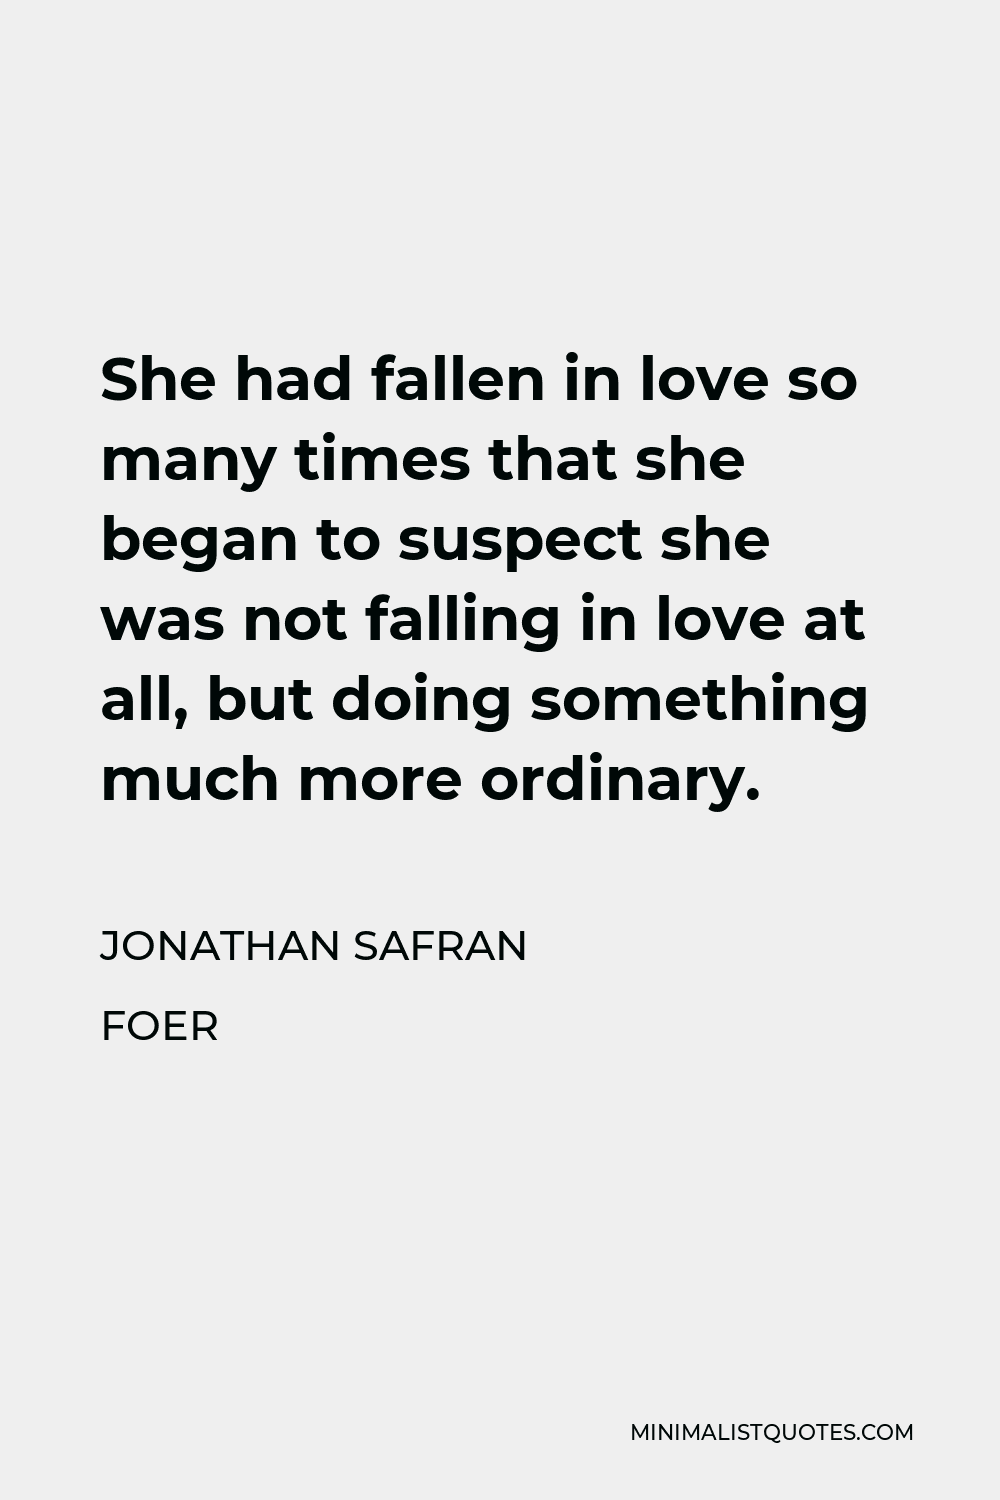 Jonathan Safran Foer Quote - She had fallen in love so many times that she began to suspect she was not falling in love at all, but doing something much more ordinary.